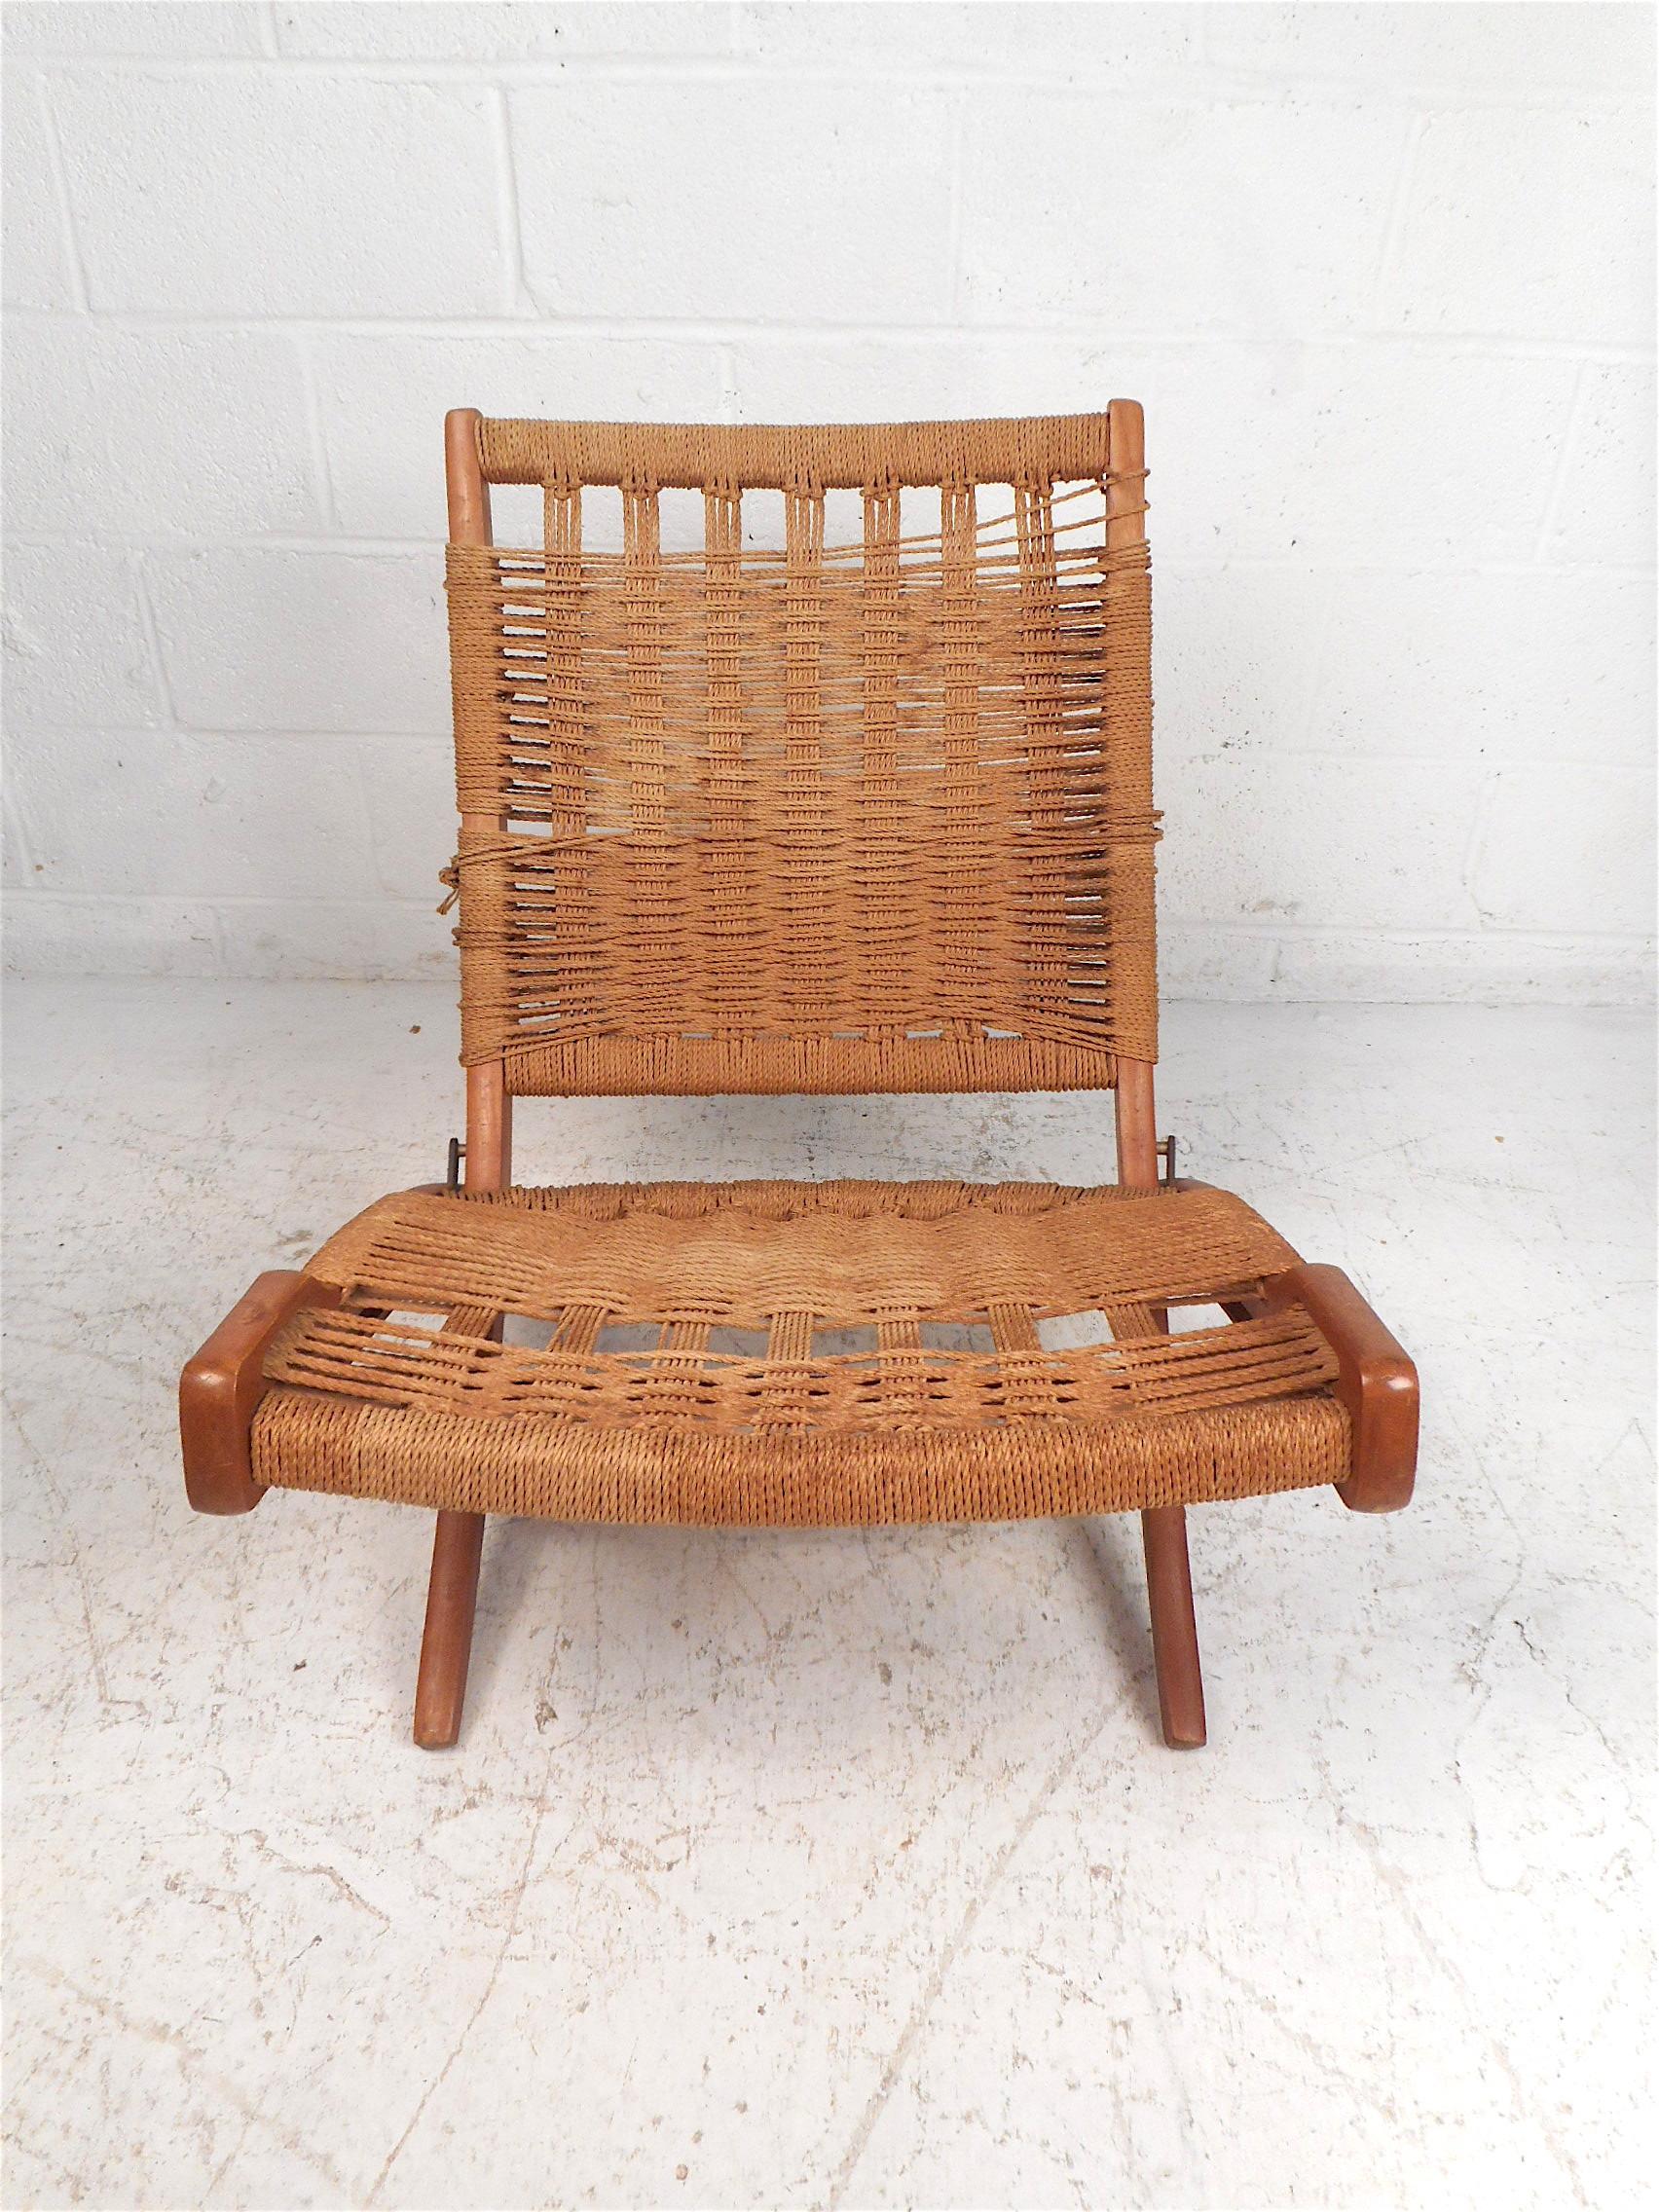 Stylish Mid-Century Modern folding chair in the style of Hans Wegner. Interestingly contoured wooden frame with a hinge which allows the chair to fold up easily when not in use. Comfortable and visually appealing woven rope upholstery on the seat